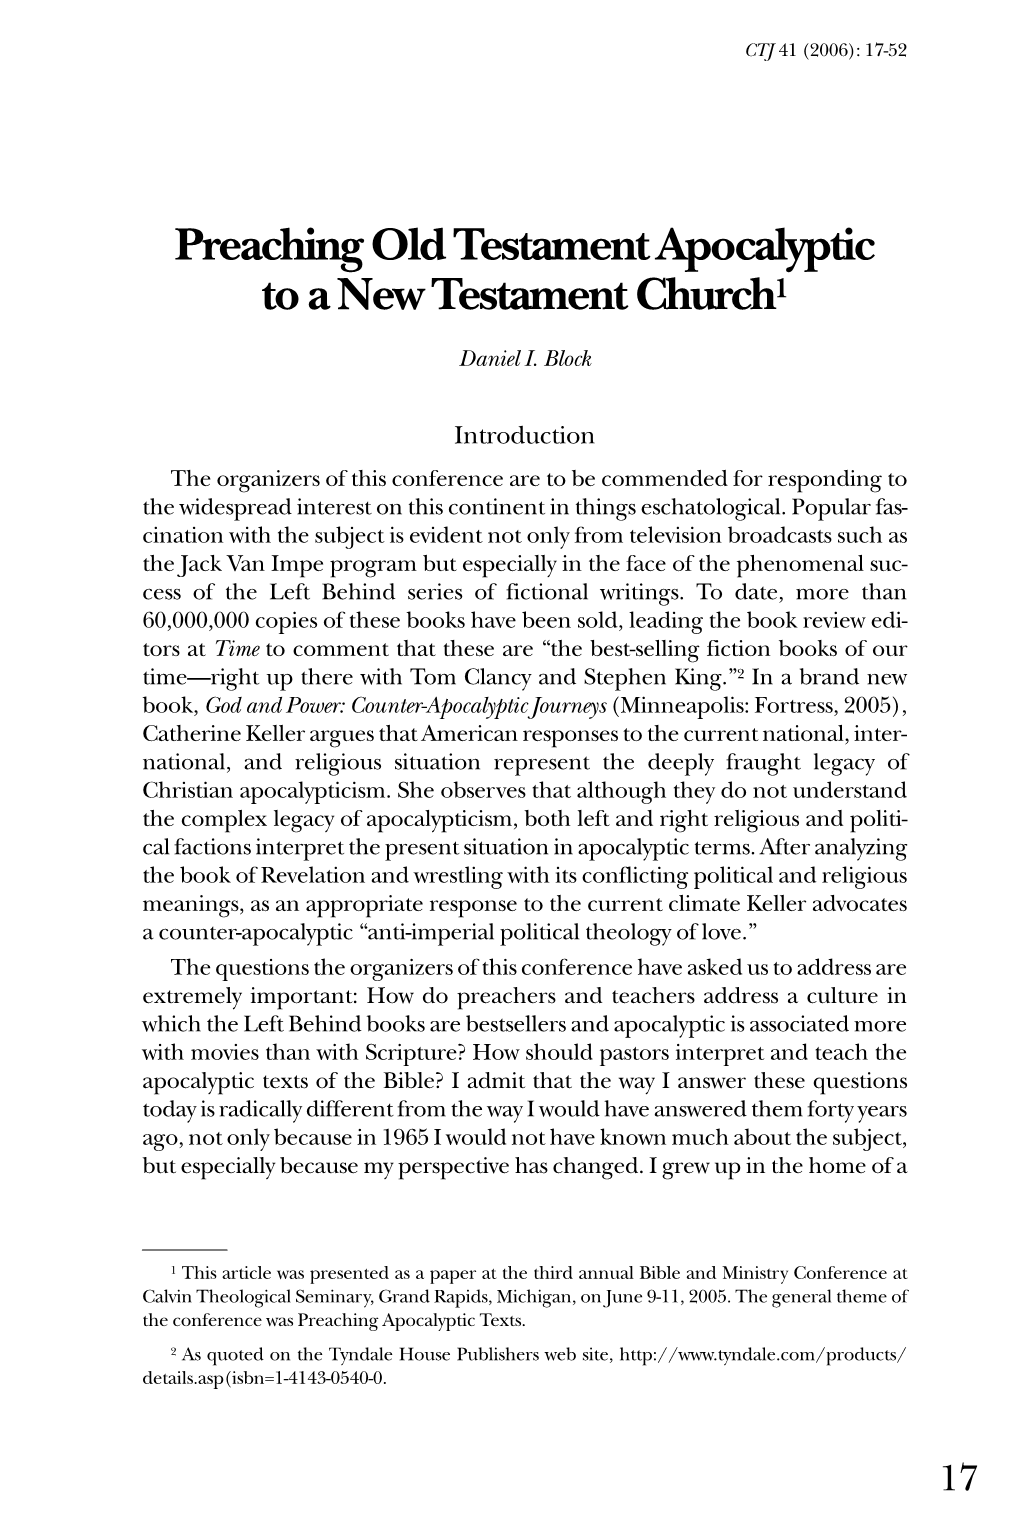 Preaching Old Testament Apocalyptic to a New Testament Church1